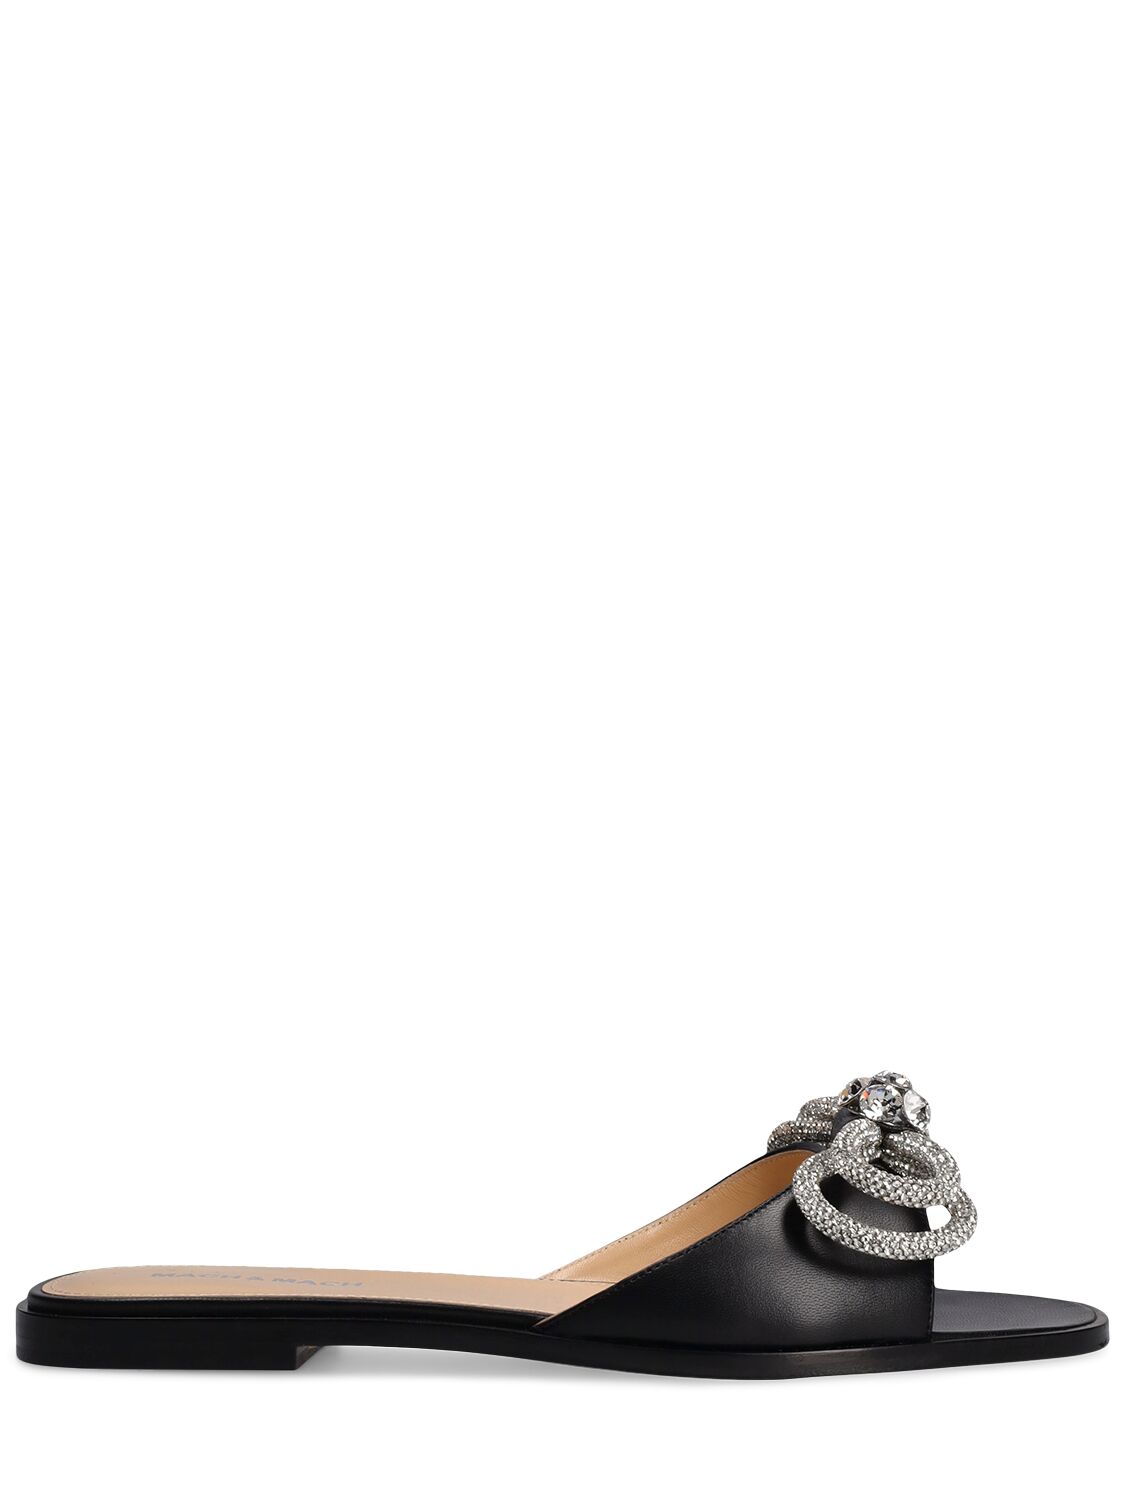 Mach & Mach 10mm Double Bow Leather Flat Sandals In Black